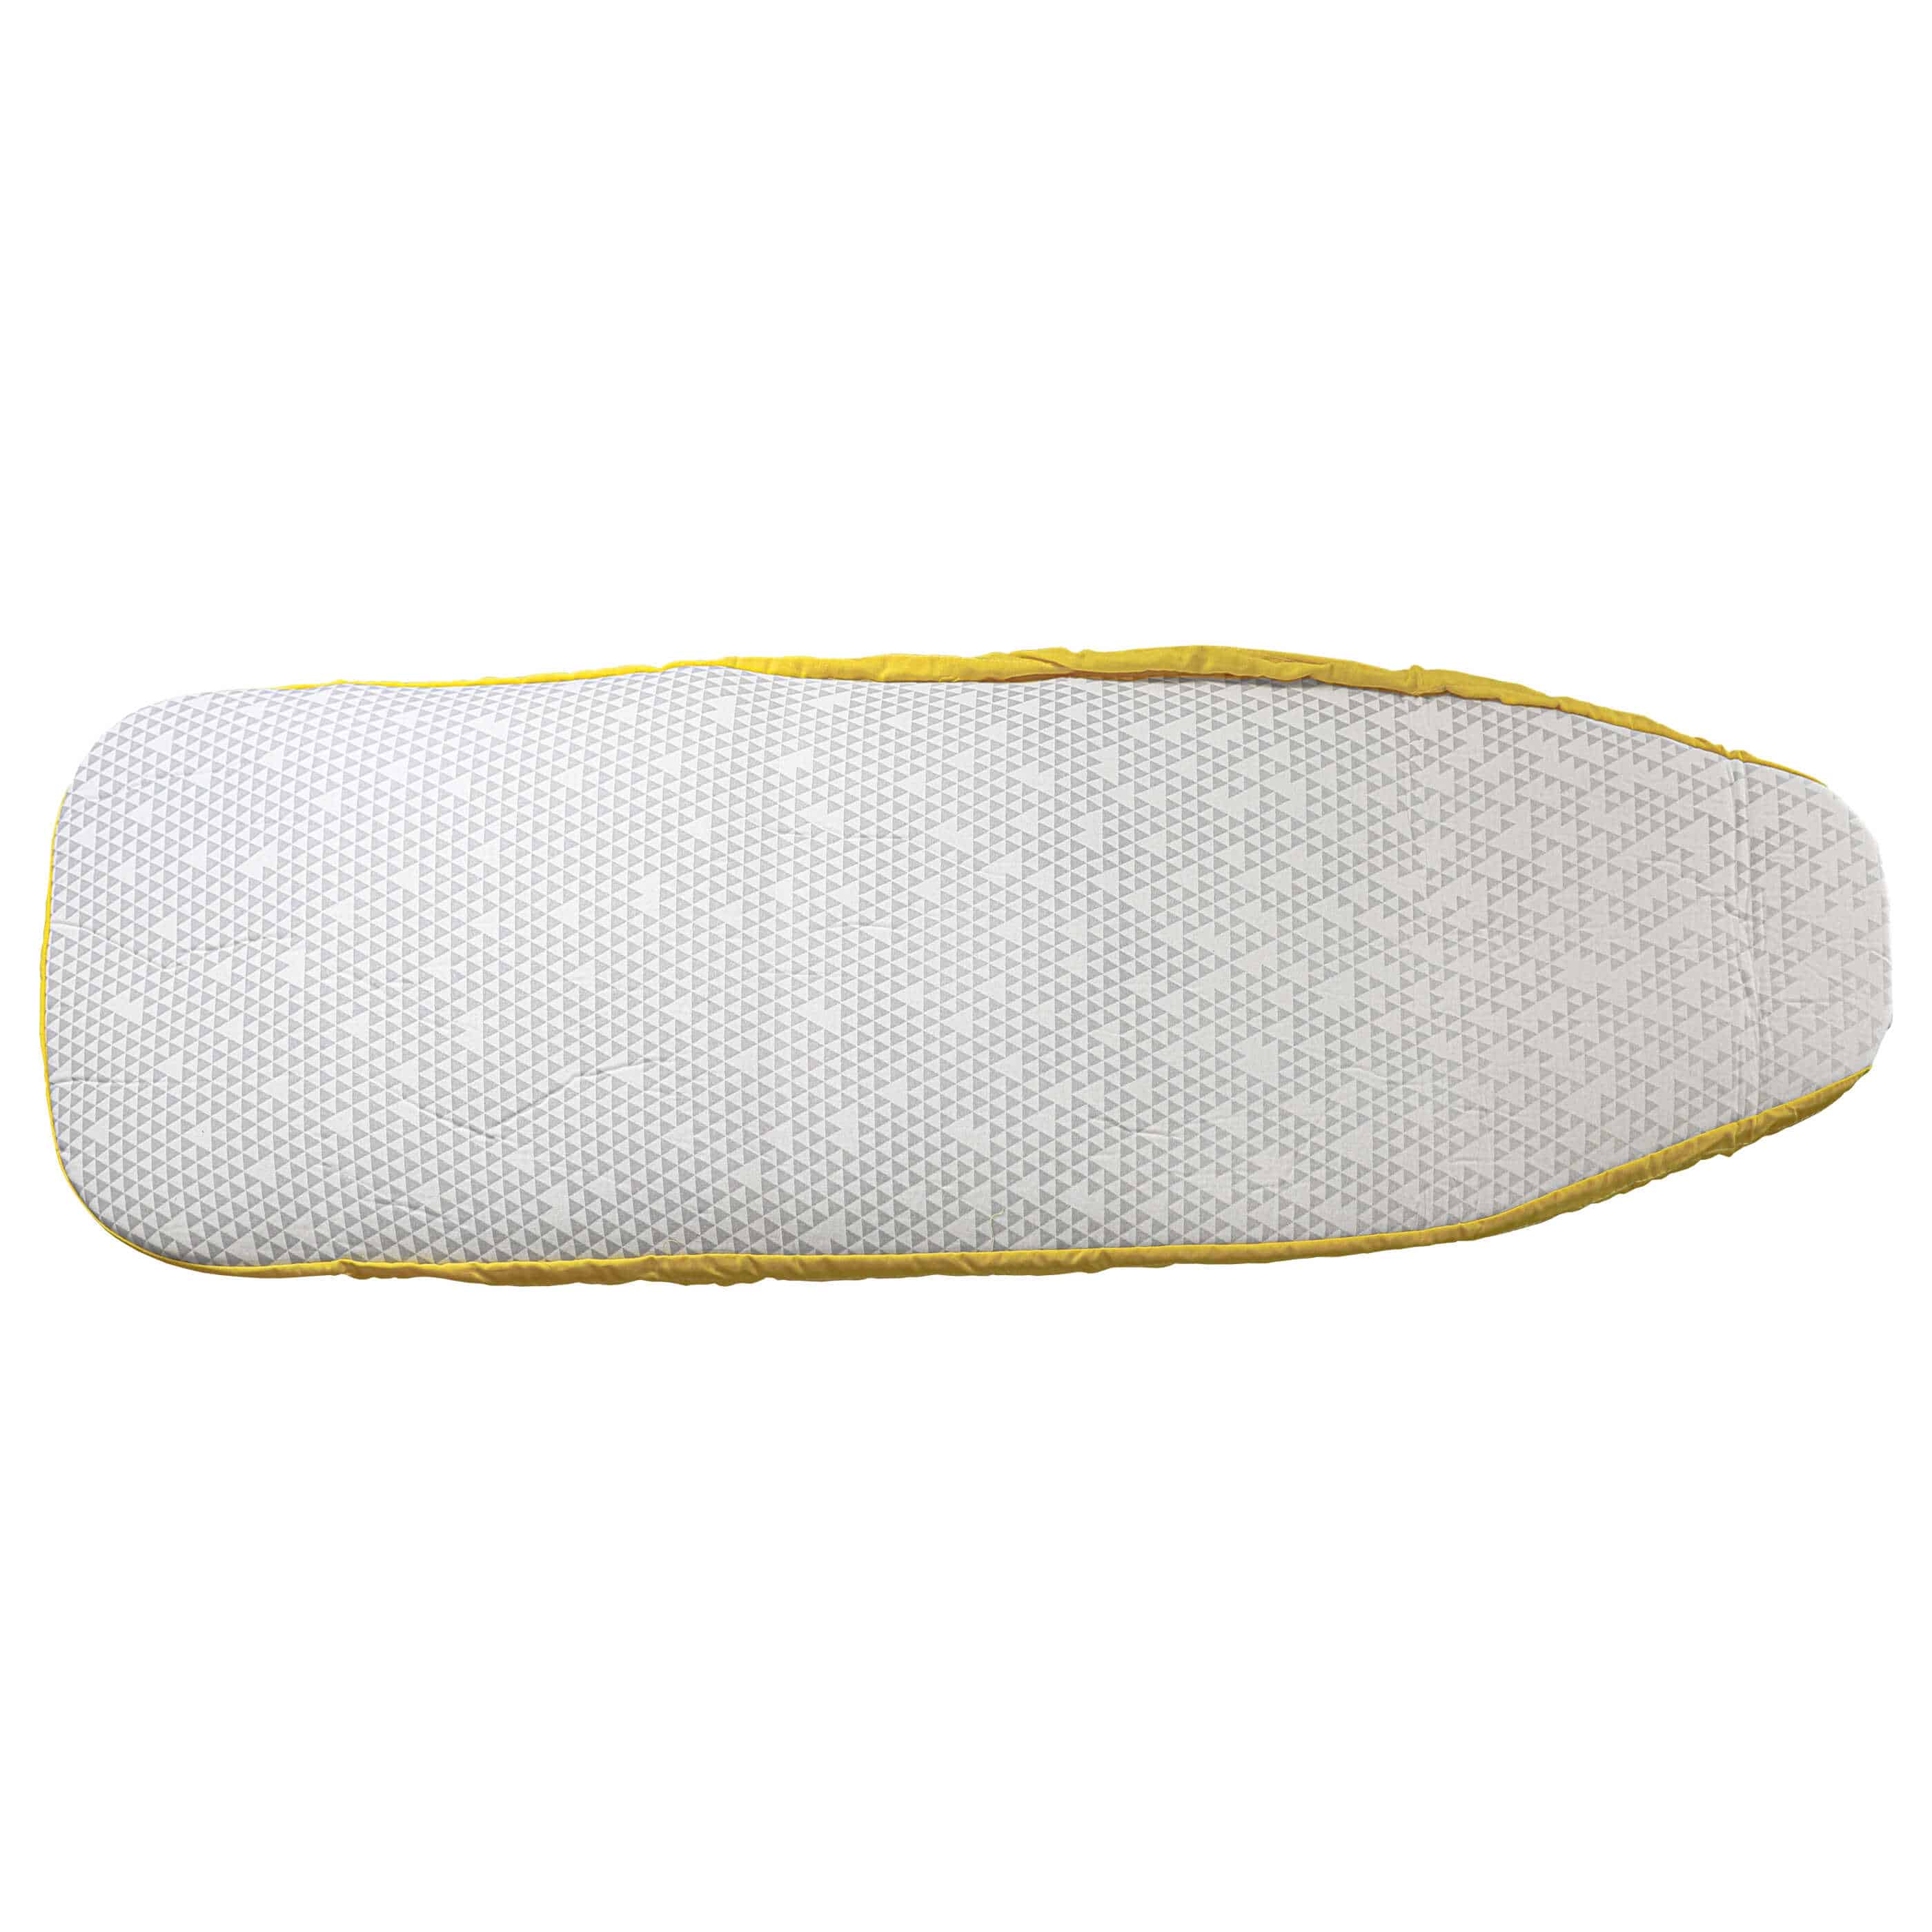 Ironing Board Cover replaces Kärcher 2.884-969.0 for Kärcher Active Ironing Board - Ironing Board Cover